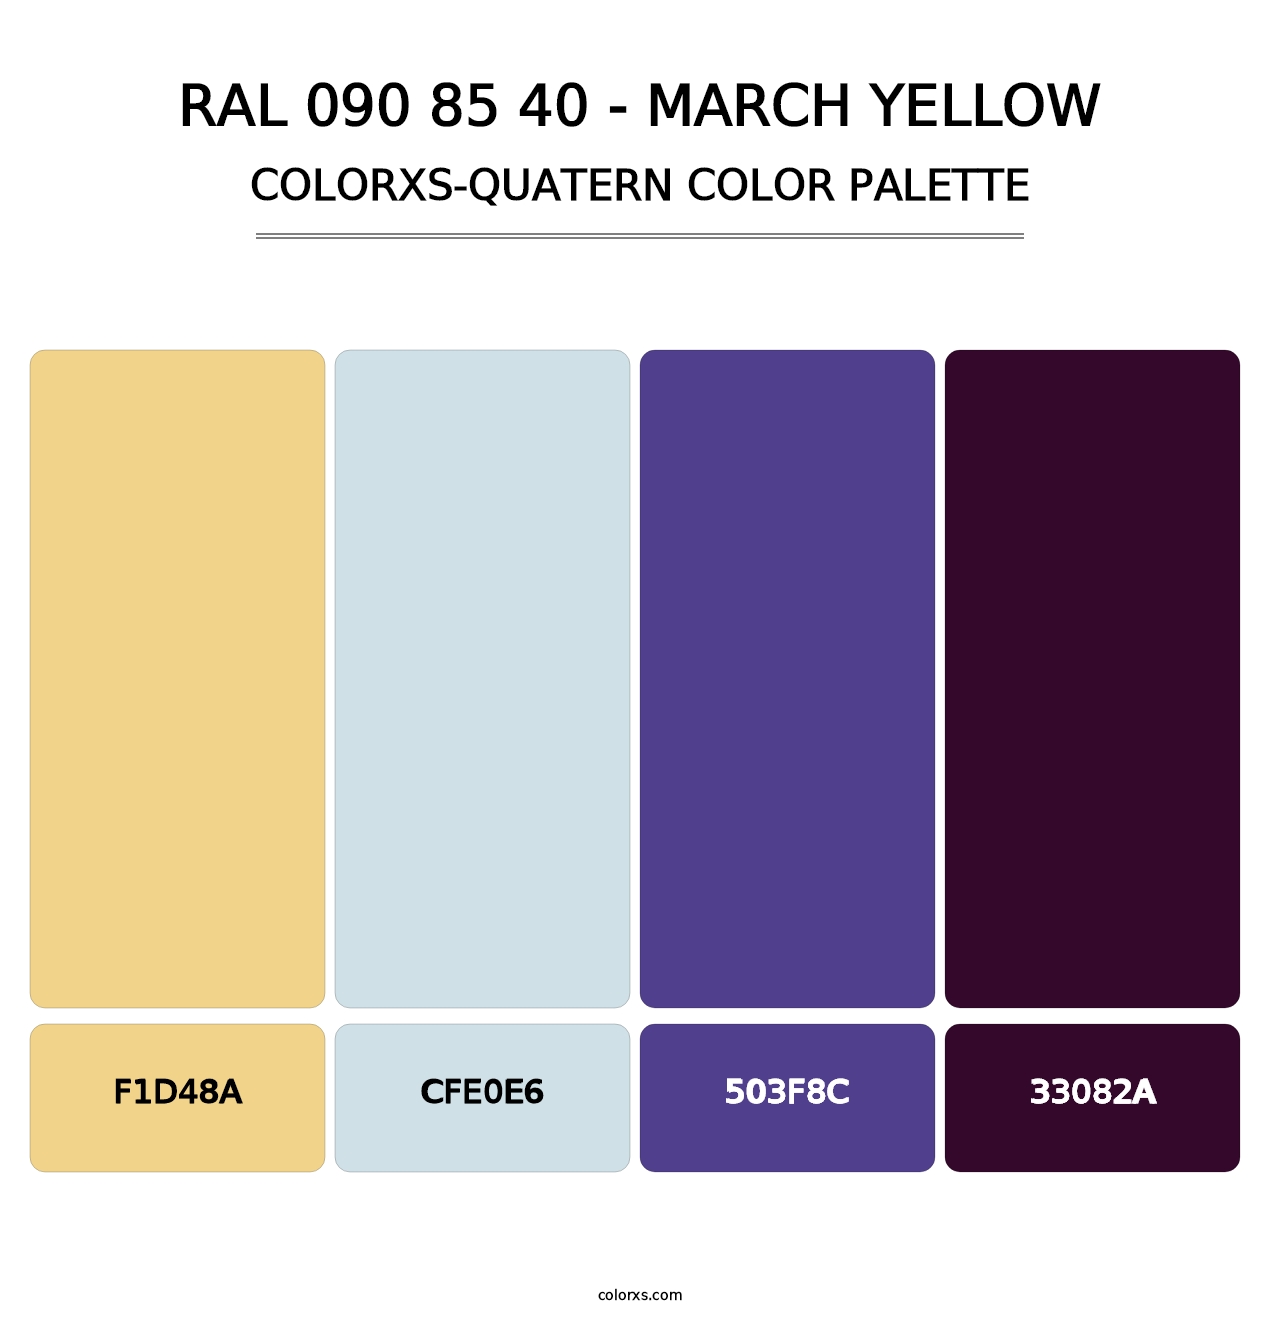 RAL 090 85 40 - March Yellow - Colorxs Quatern Palette